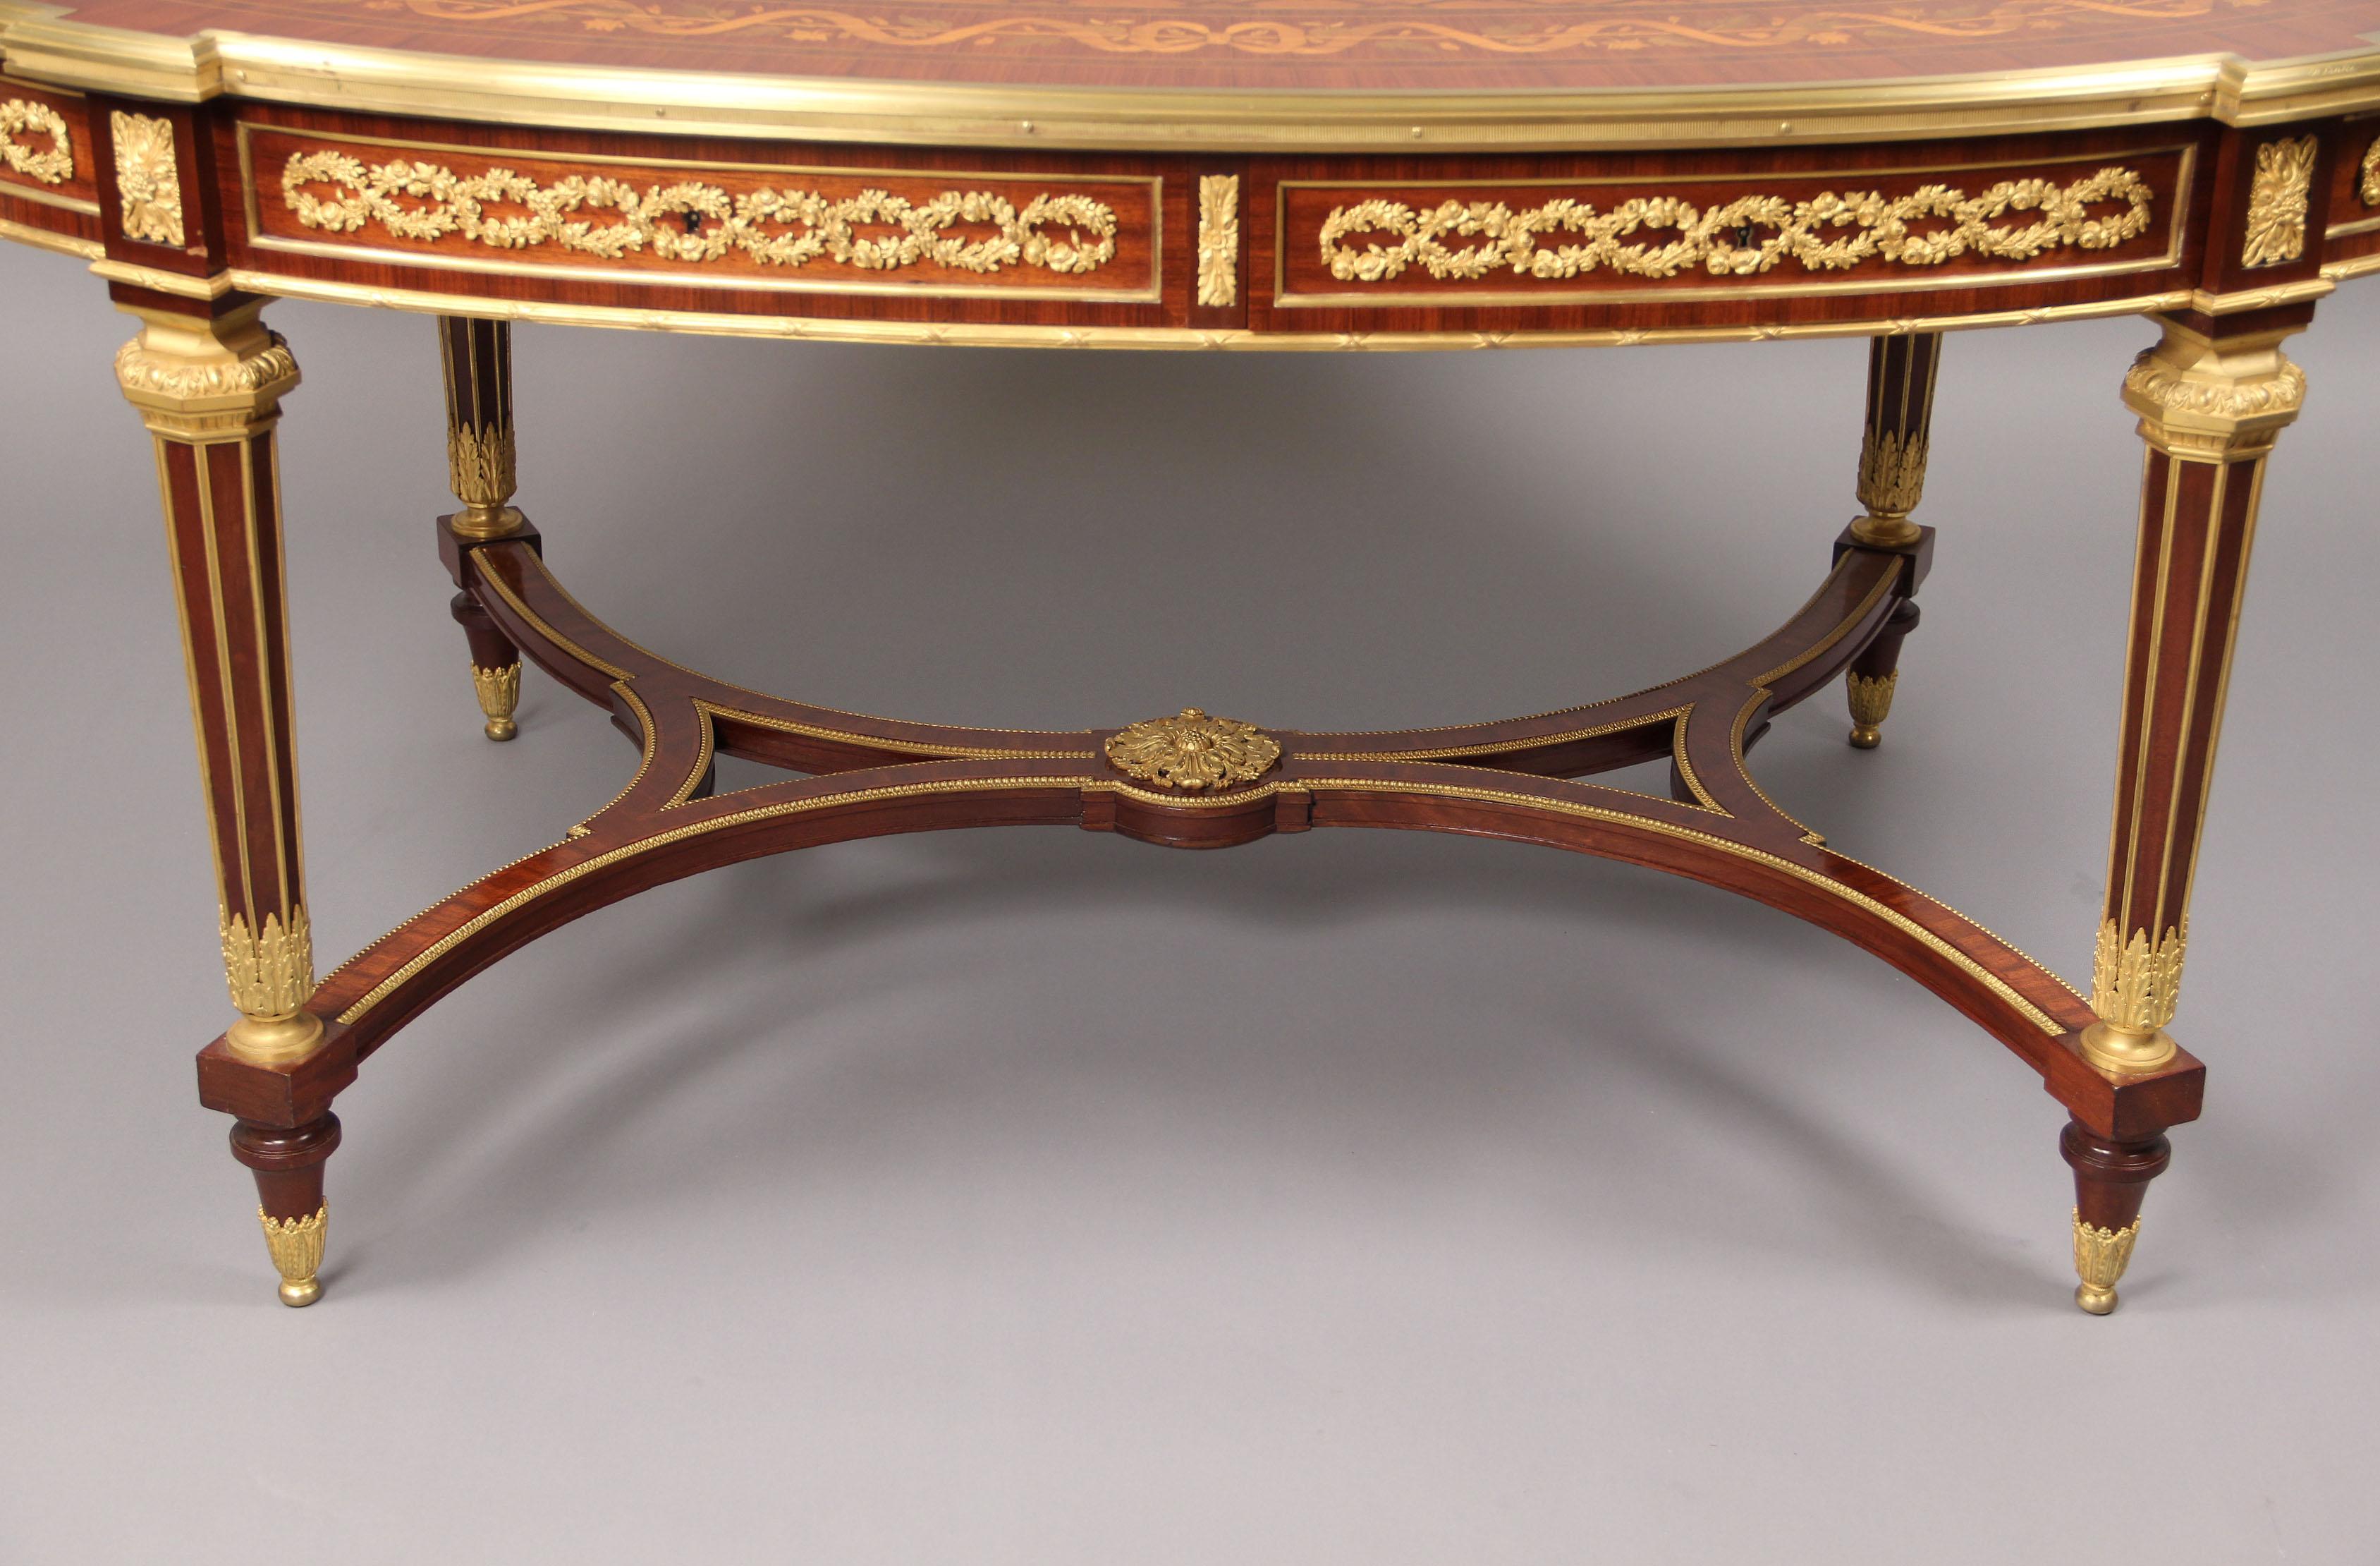 Belle Époque Rare Late 19th Century Inlaid Marquetry Center Table by François Linke For Sale